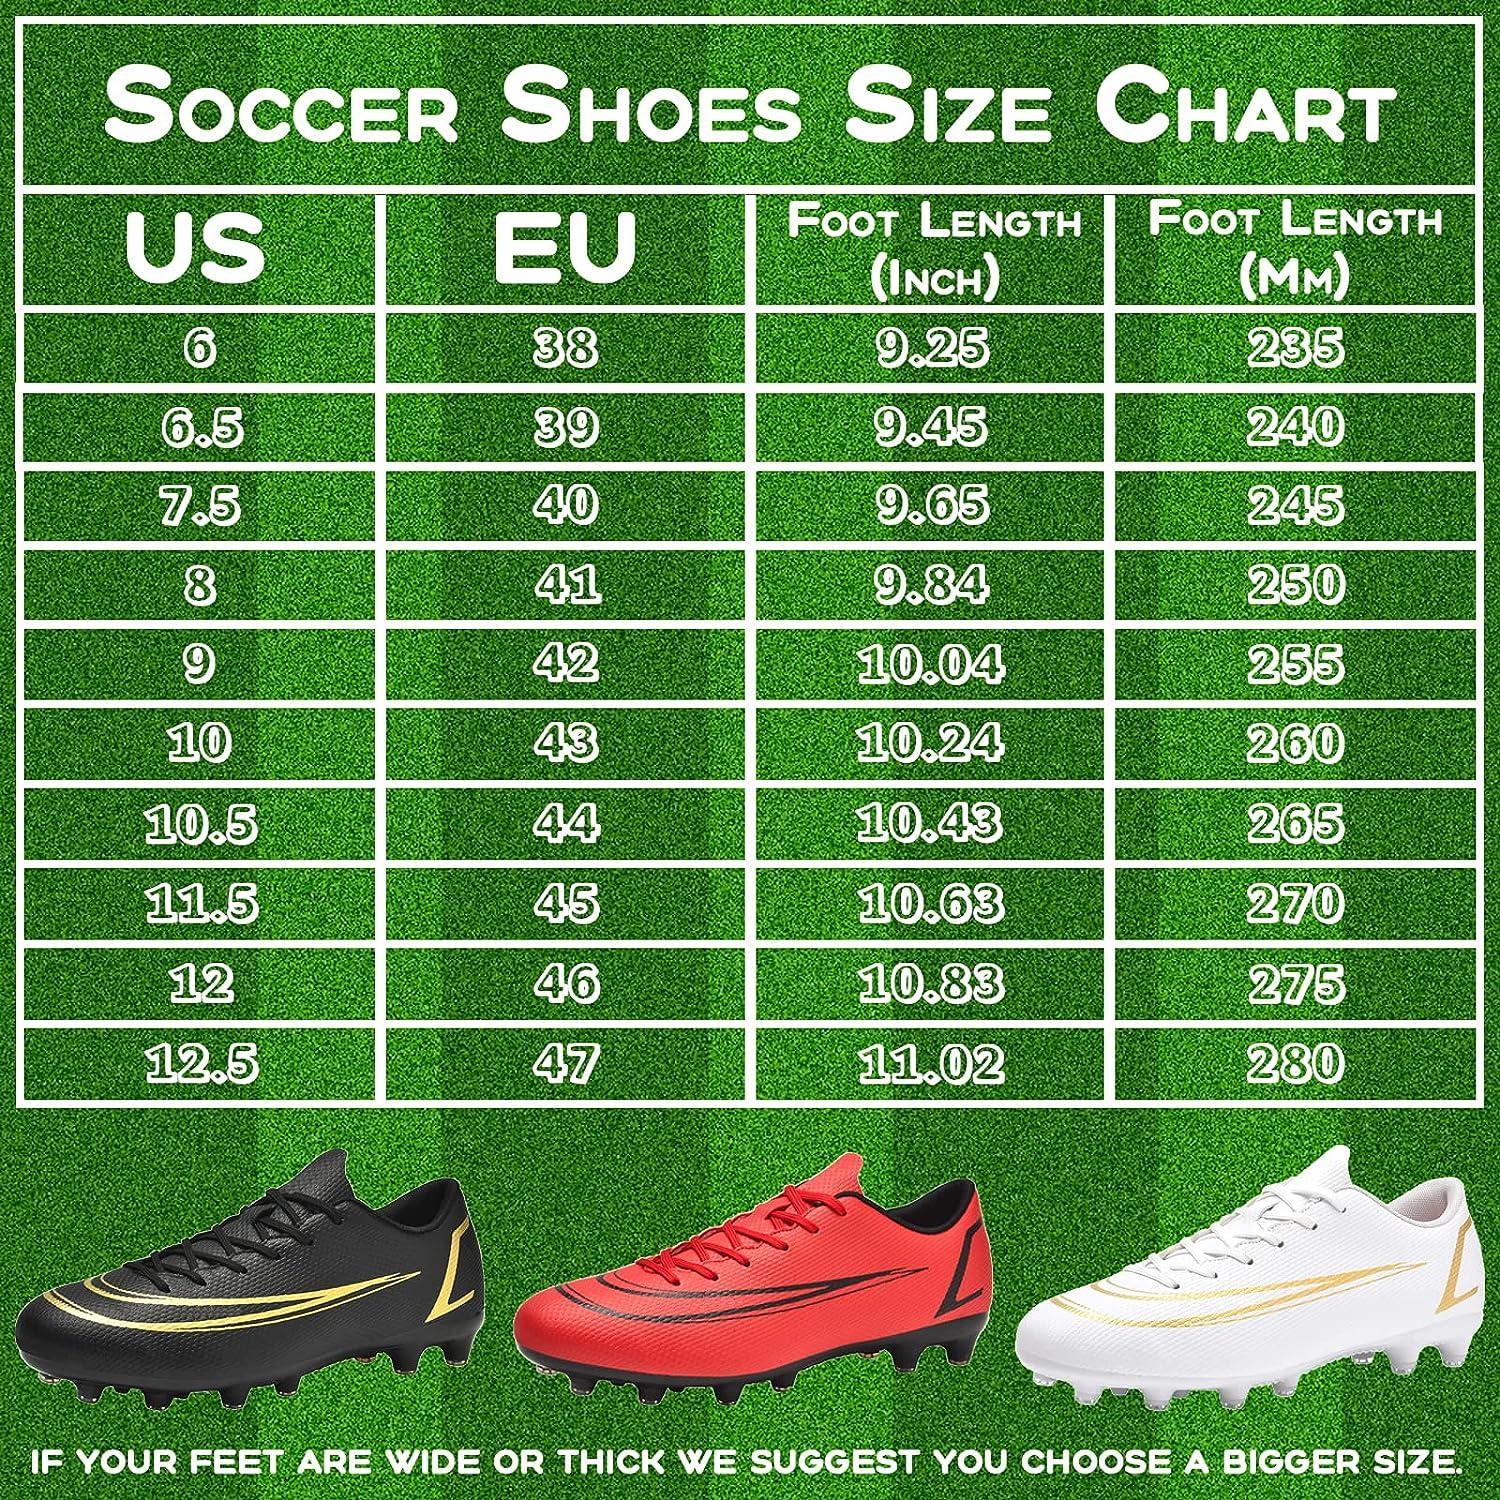 Top Quality Soccer Cleats Men Custom Soccer Shoes Football Boots